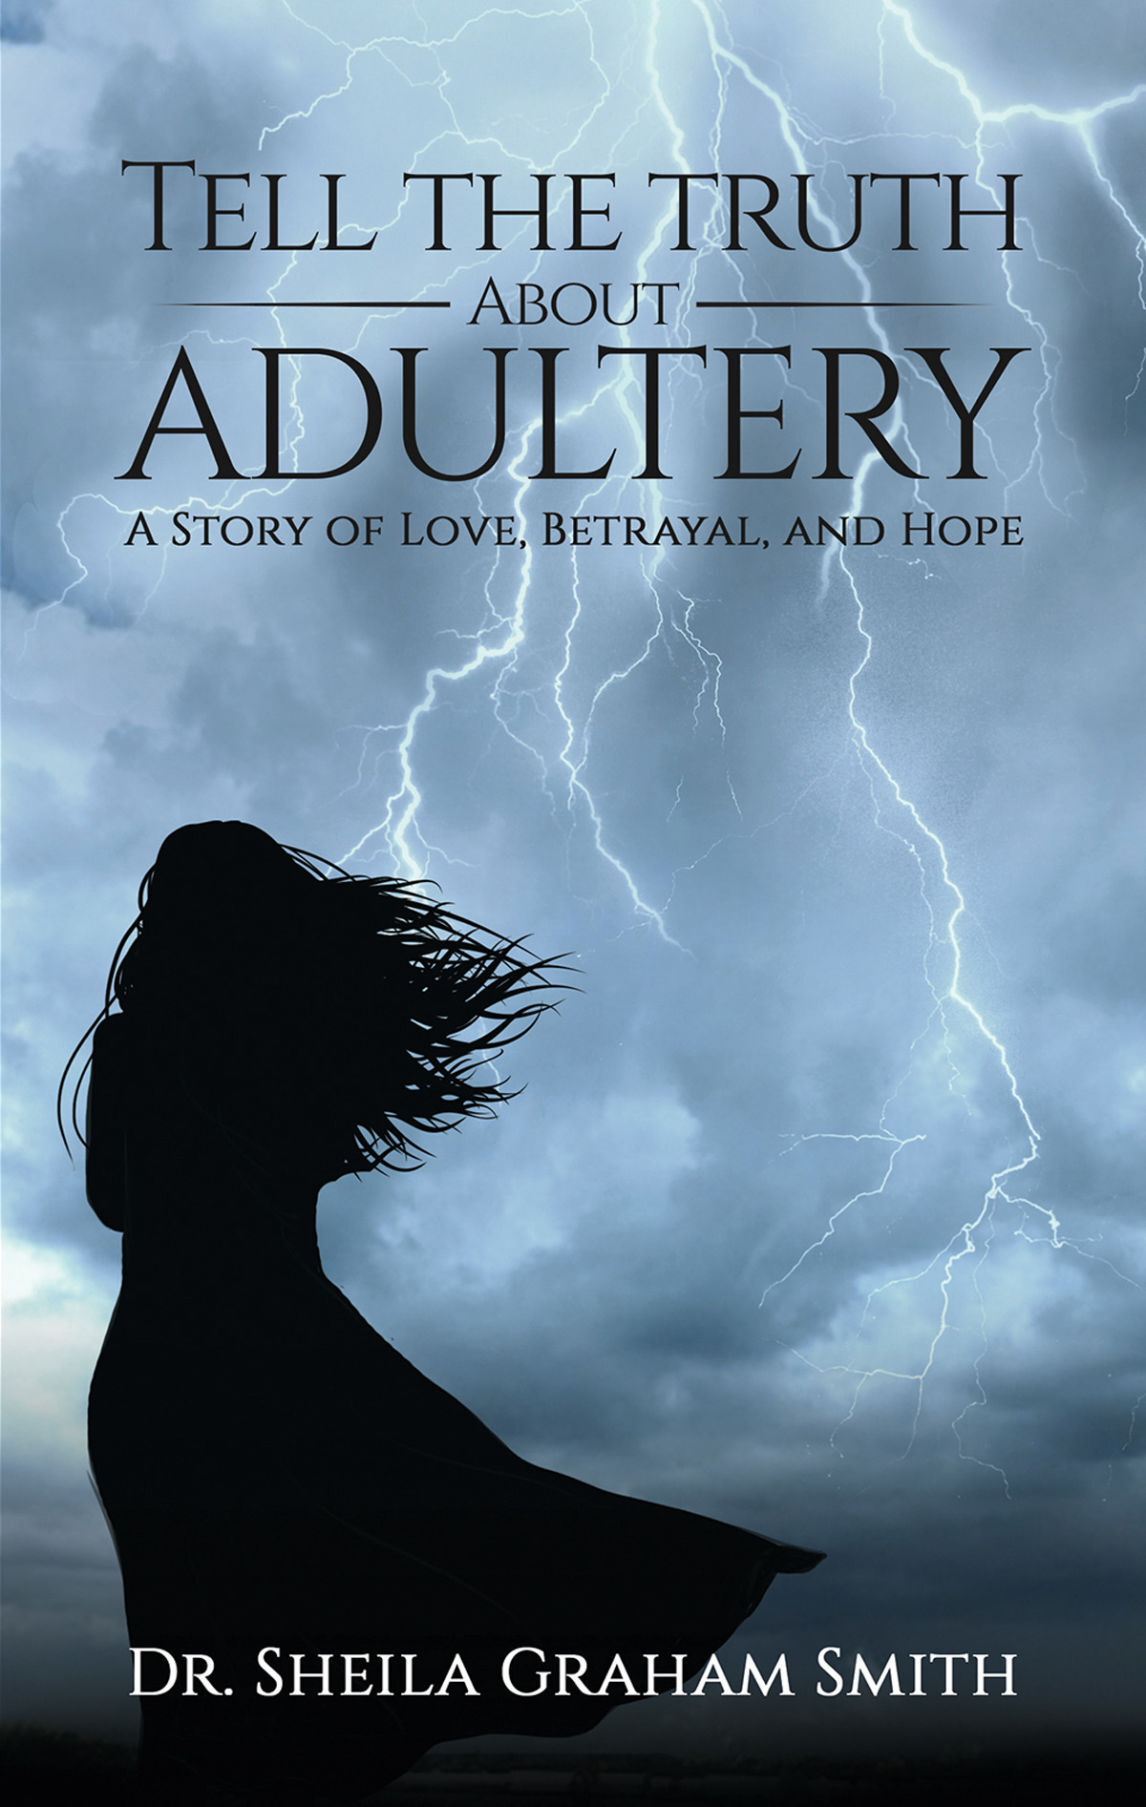 Former pastors wife shares her story about living with adultery pic image